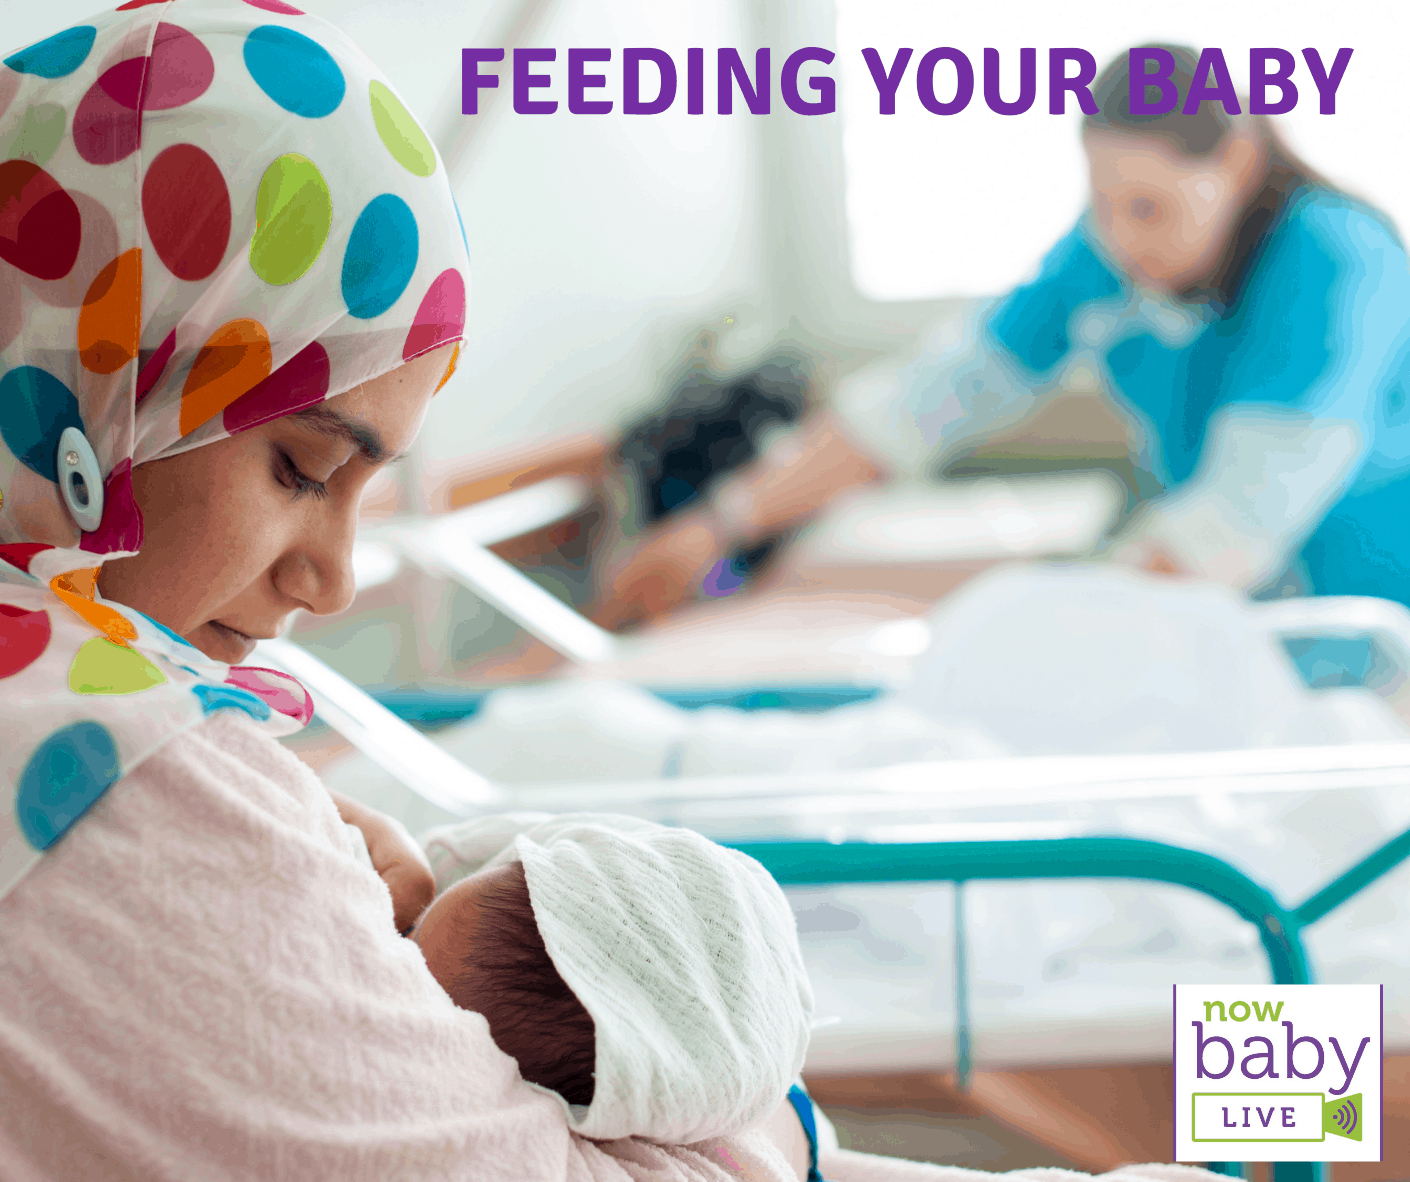 Feeding your baby – a quick guide for mums